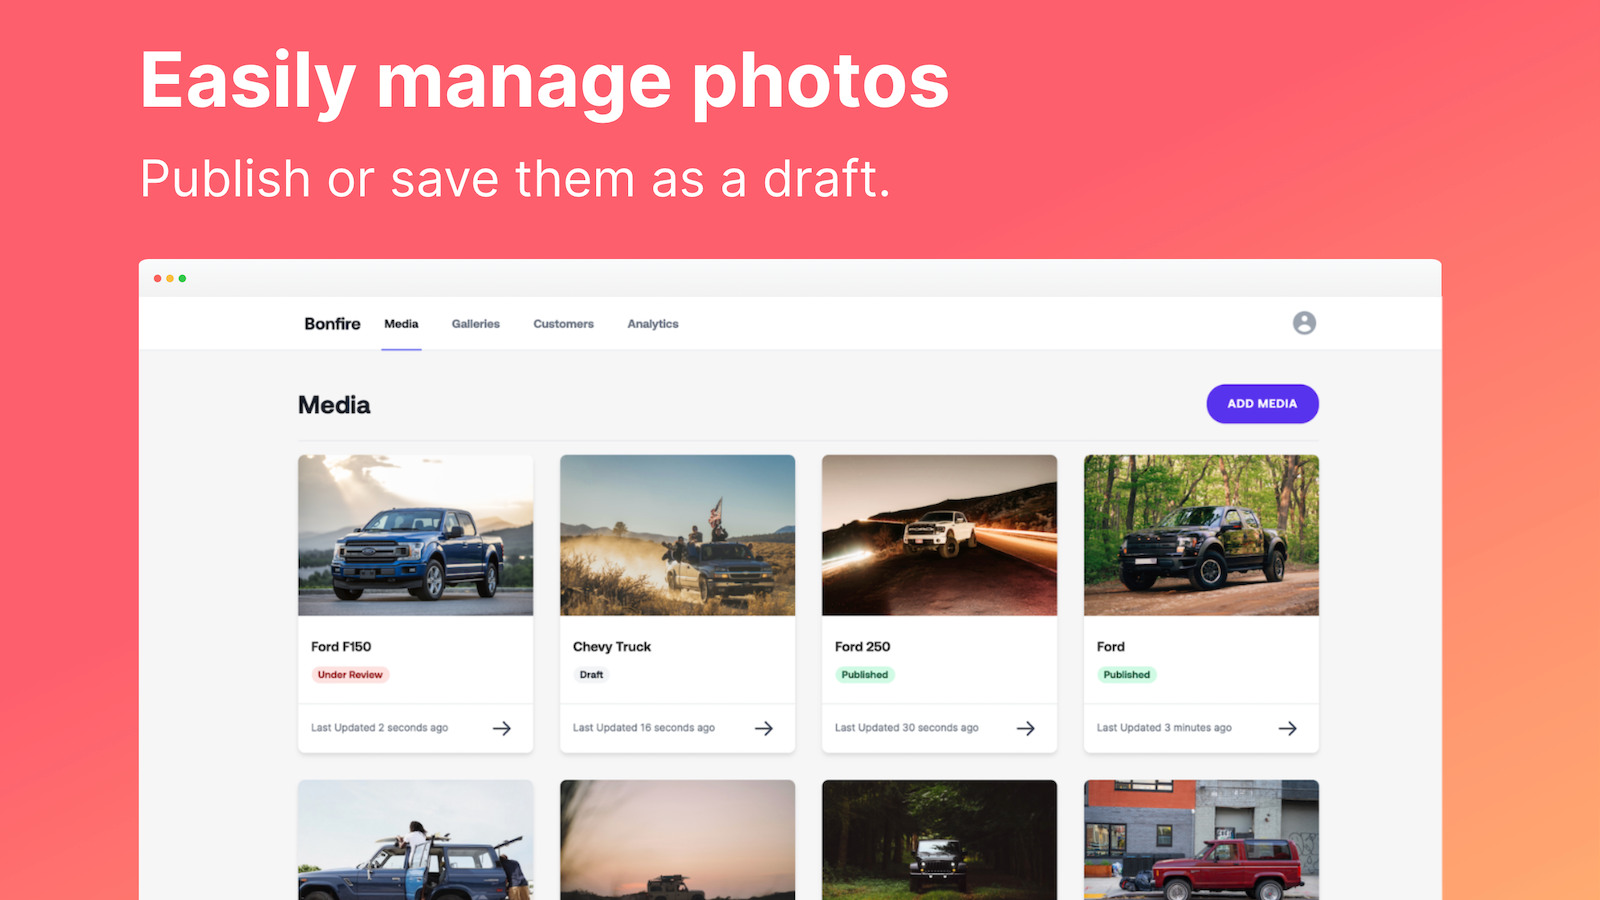 Upload your images and easily publish or save them as a draft.